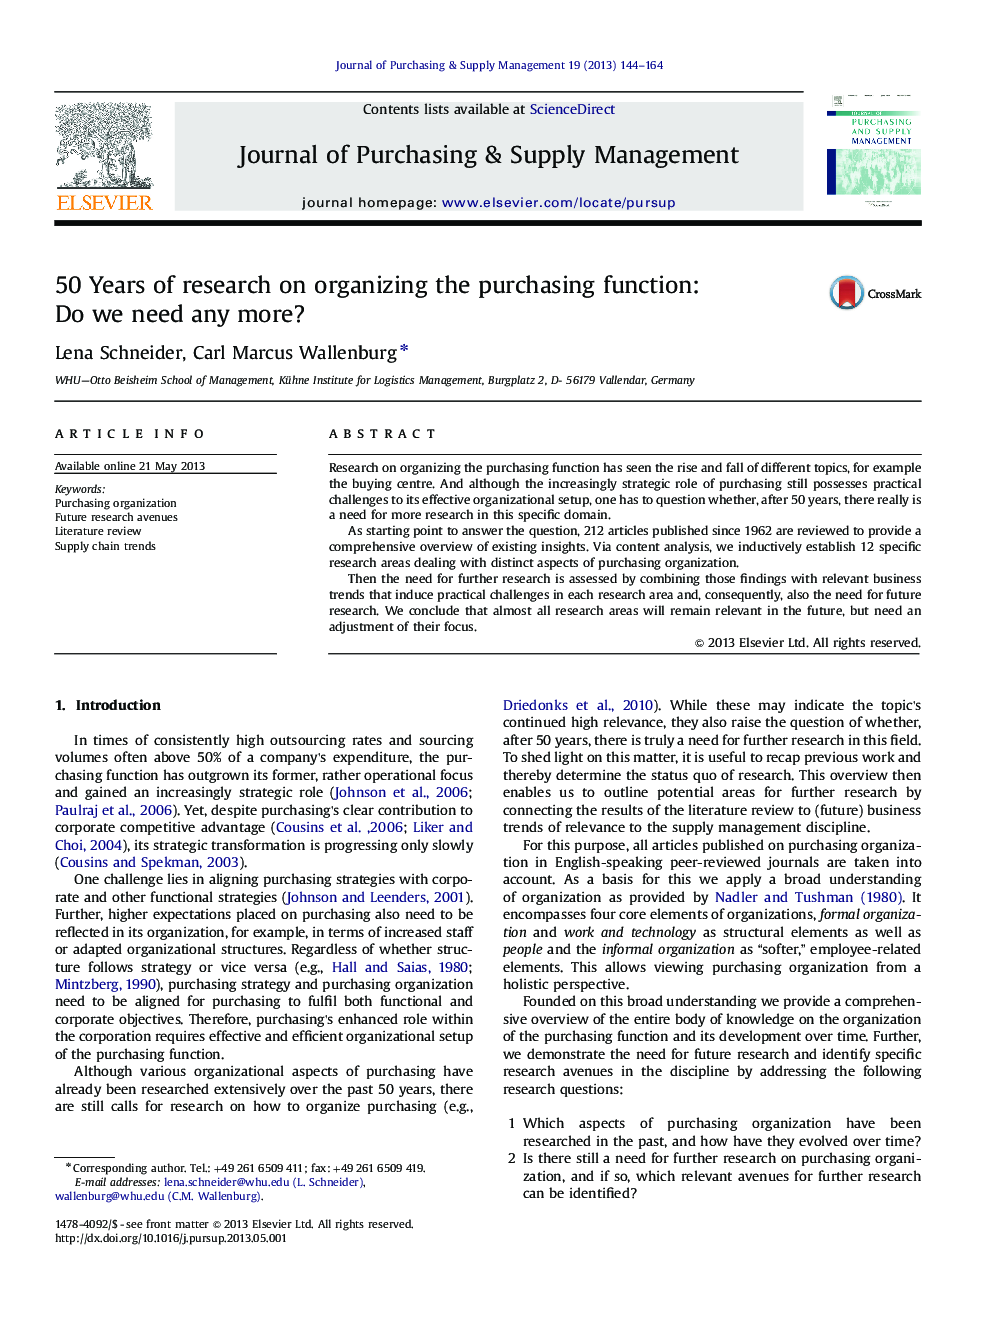 50 Years of research on organizing the purchasing function: Do we need any more?